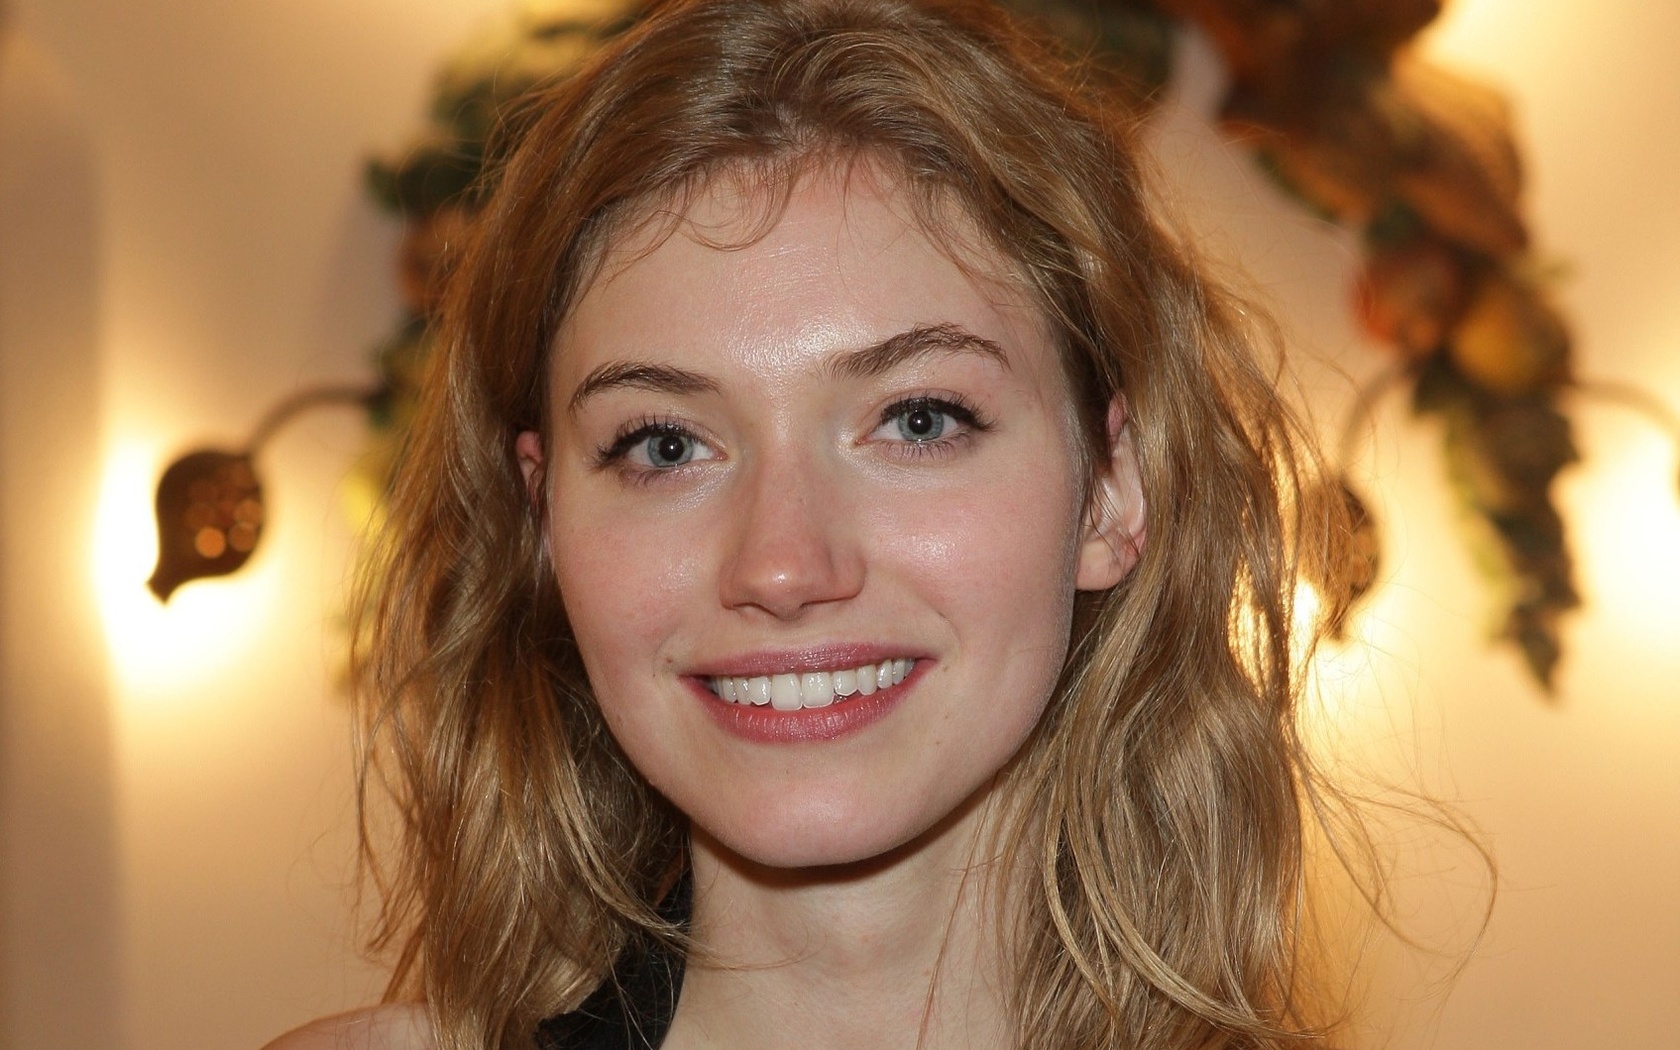 Imogen Poots in Fright Night.